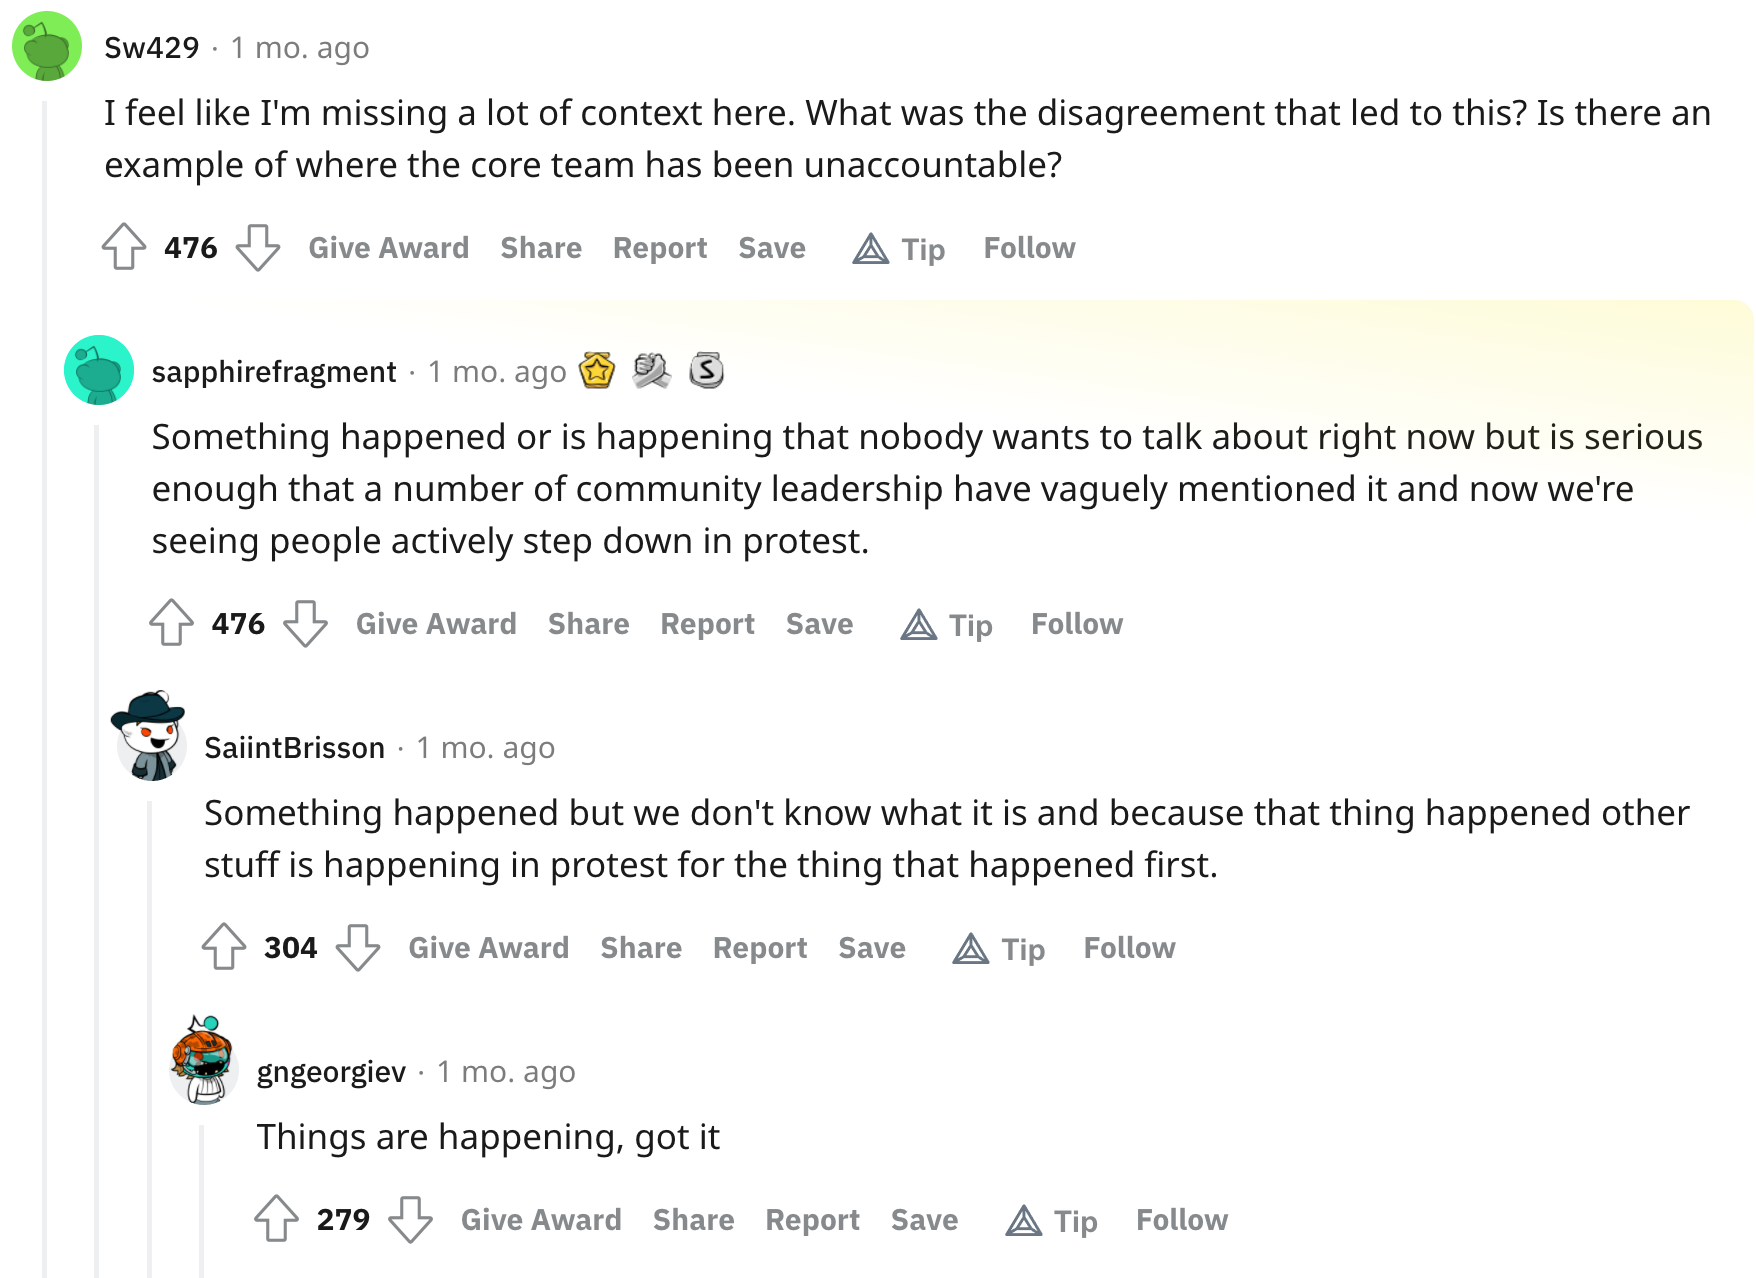 screen shot of this message from reddit https://www.reddit.com/r/rust/comments/qzme1z/moderation_team_resignation/hln62vg